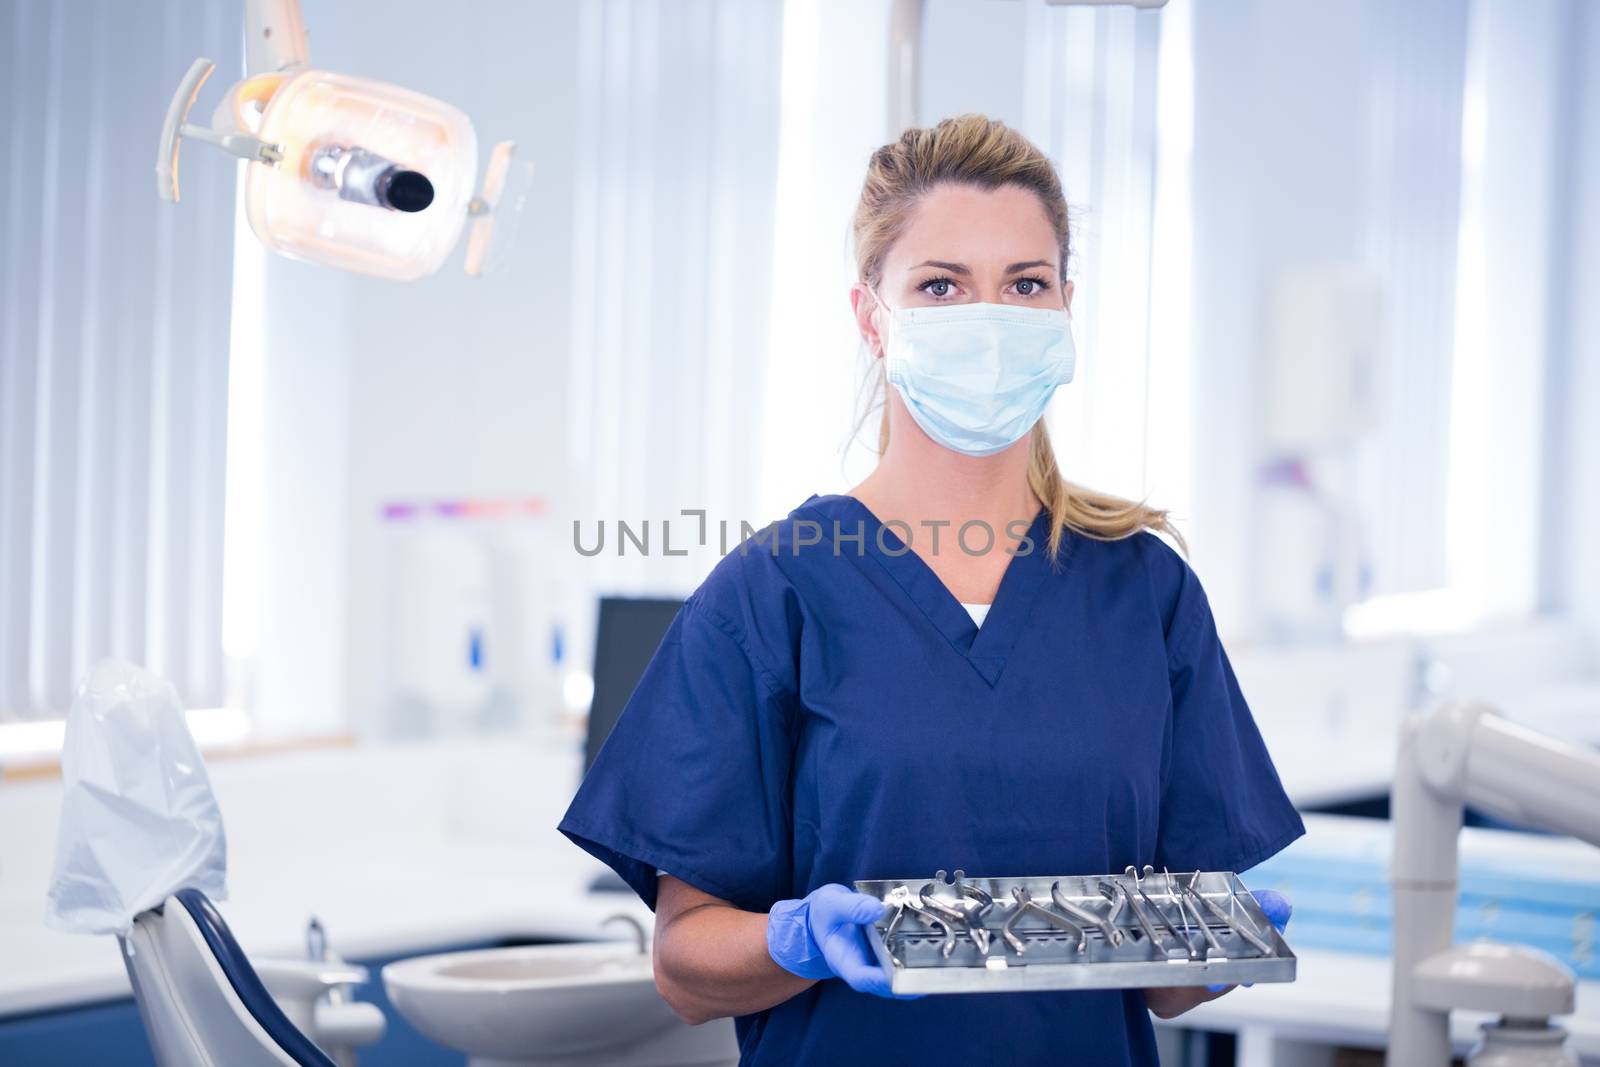 Dentist in mask holding tray of tools at the dental clinic